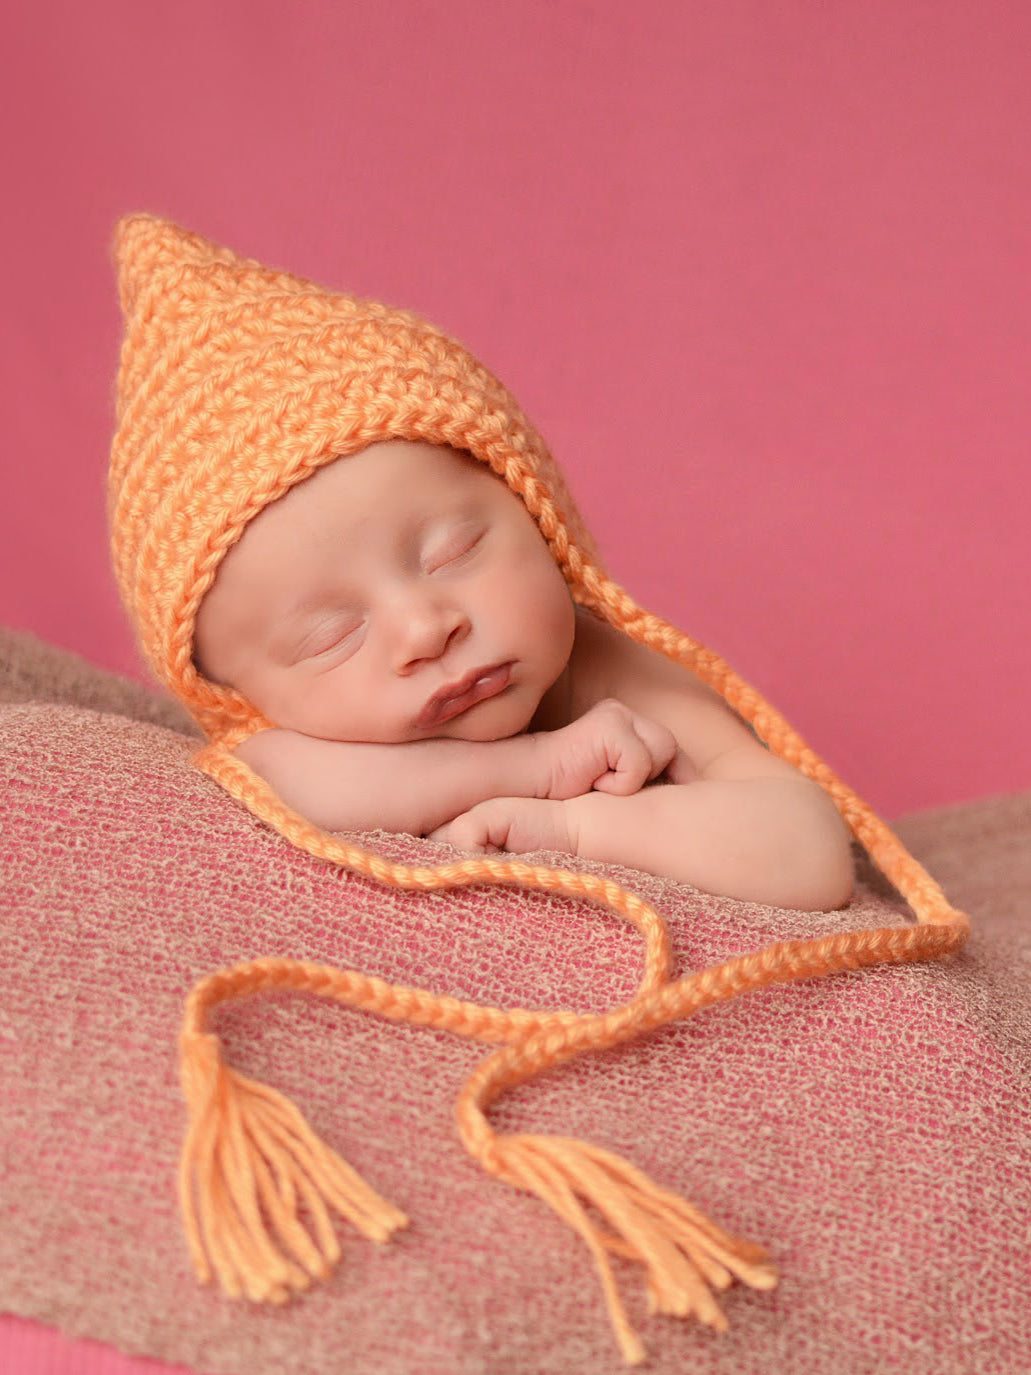 Tangerine pixie elf hat by Two Seaside Babes